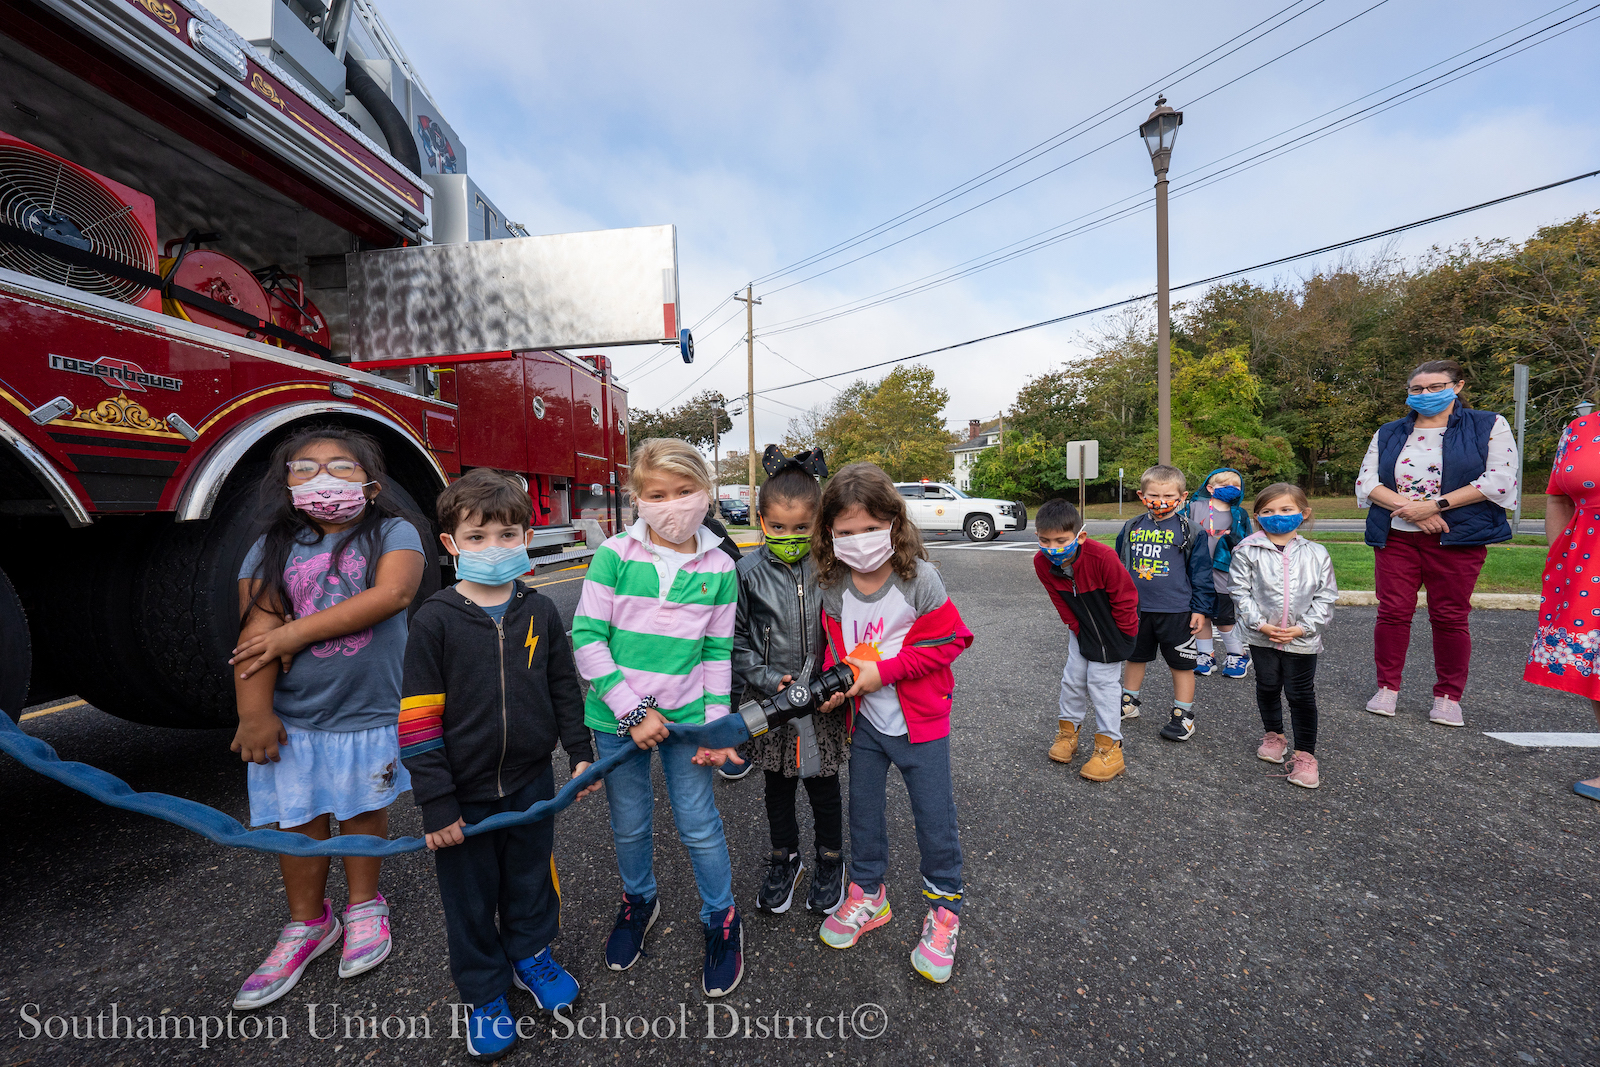 Southampton Elementary School students in grades pre-K to 3 learned about fire safety from the Southampton Fire Department on Oct. 22. During the visit, the students explored the fire department’s equipment and heard from firefighters about safety protocols and fire safety. 